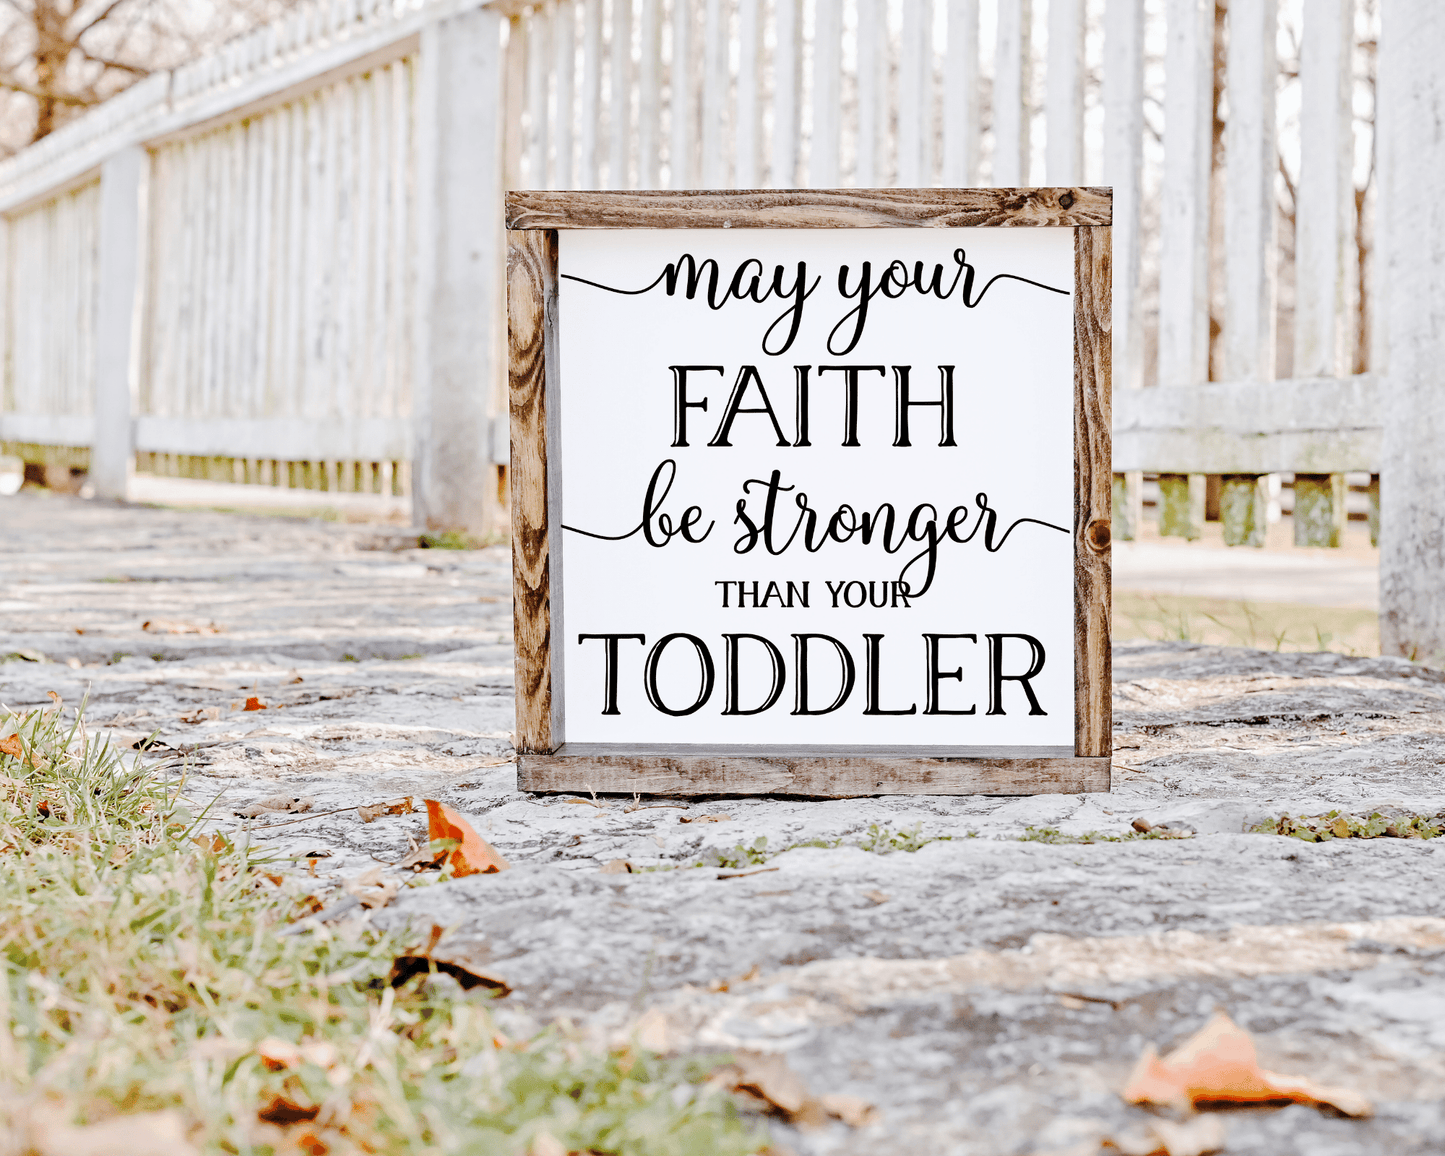 Stronger than your toddler - Wood Sign